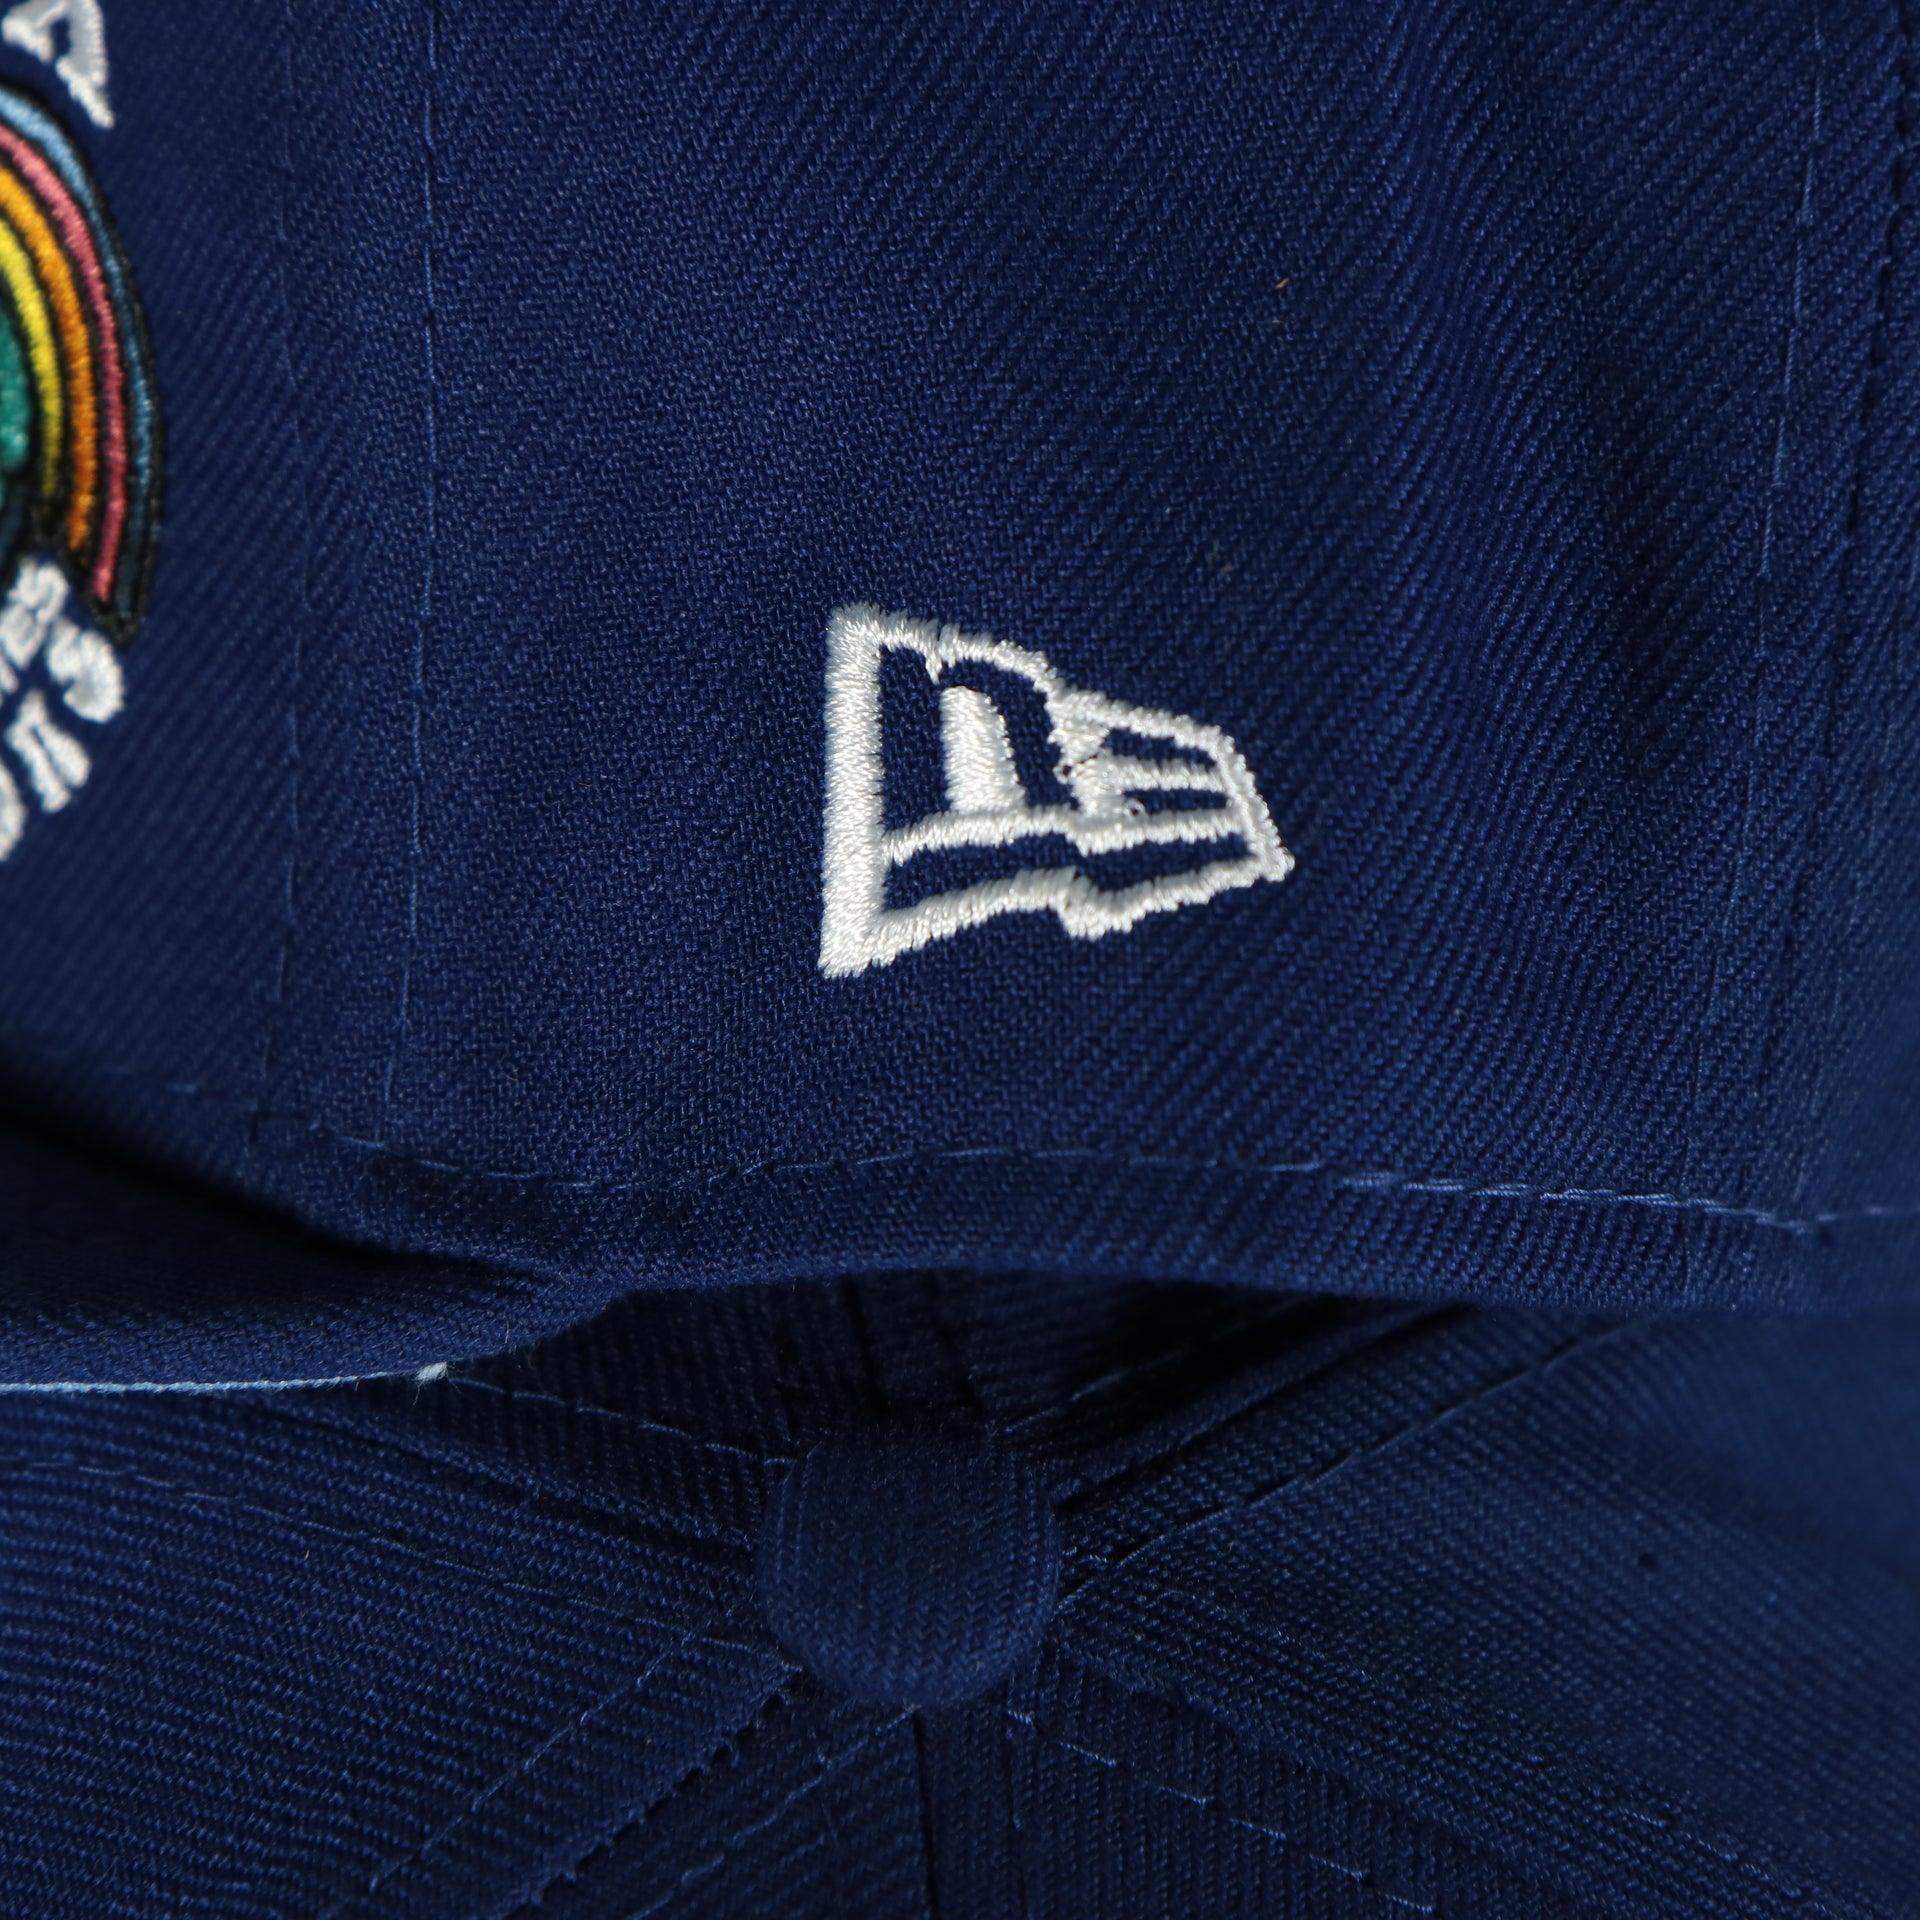 new era logo on the Los Angeles Dodgers Groovy World Series Champions Patch 59Fifty Fitted Cap | New Era Groovy Side Patch 5950